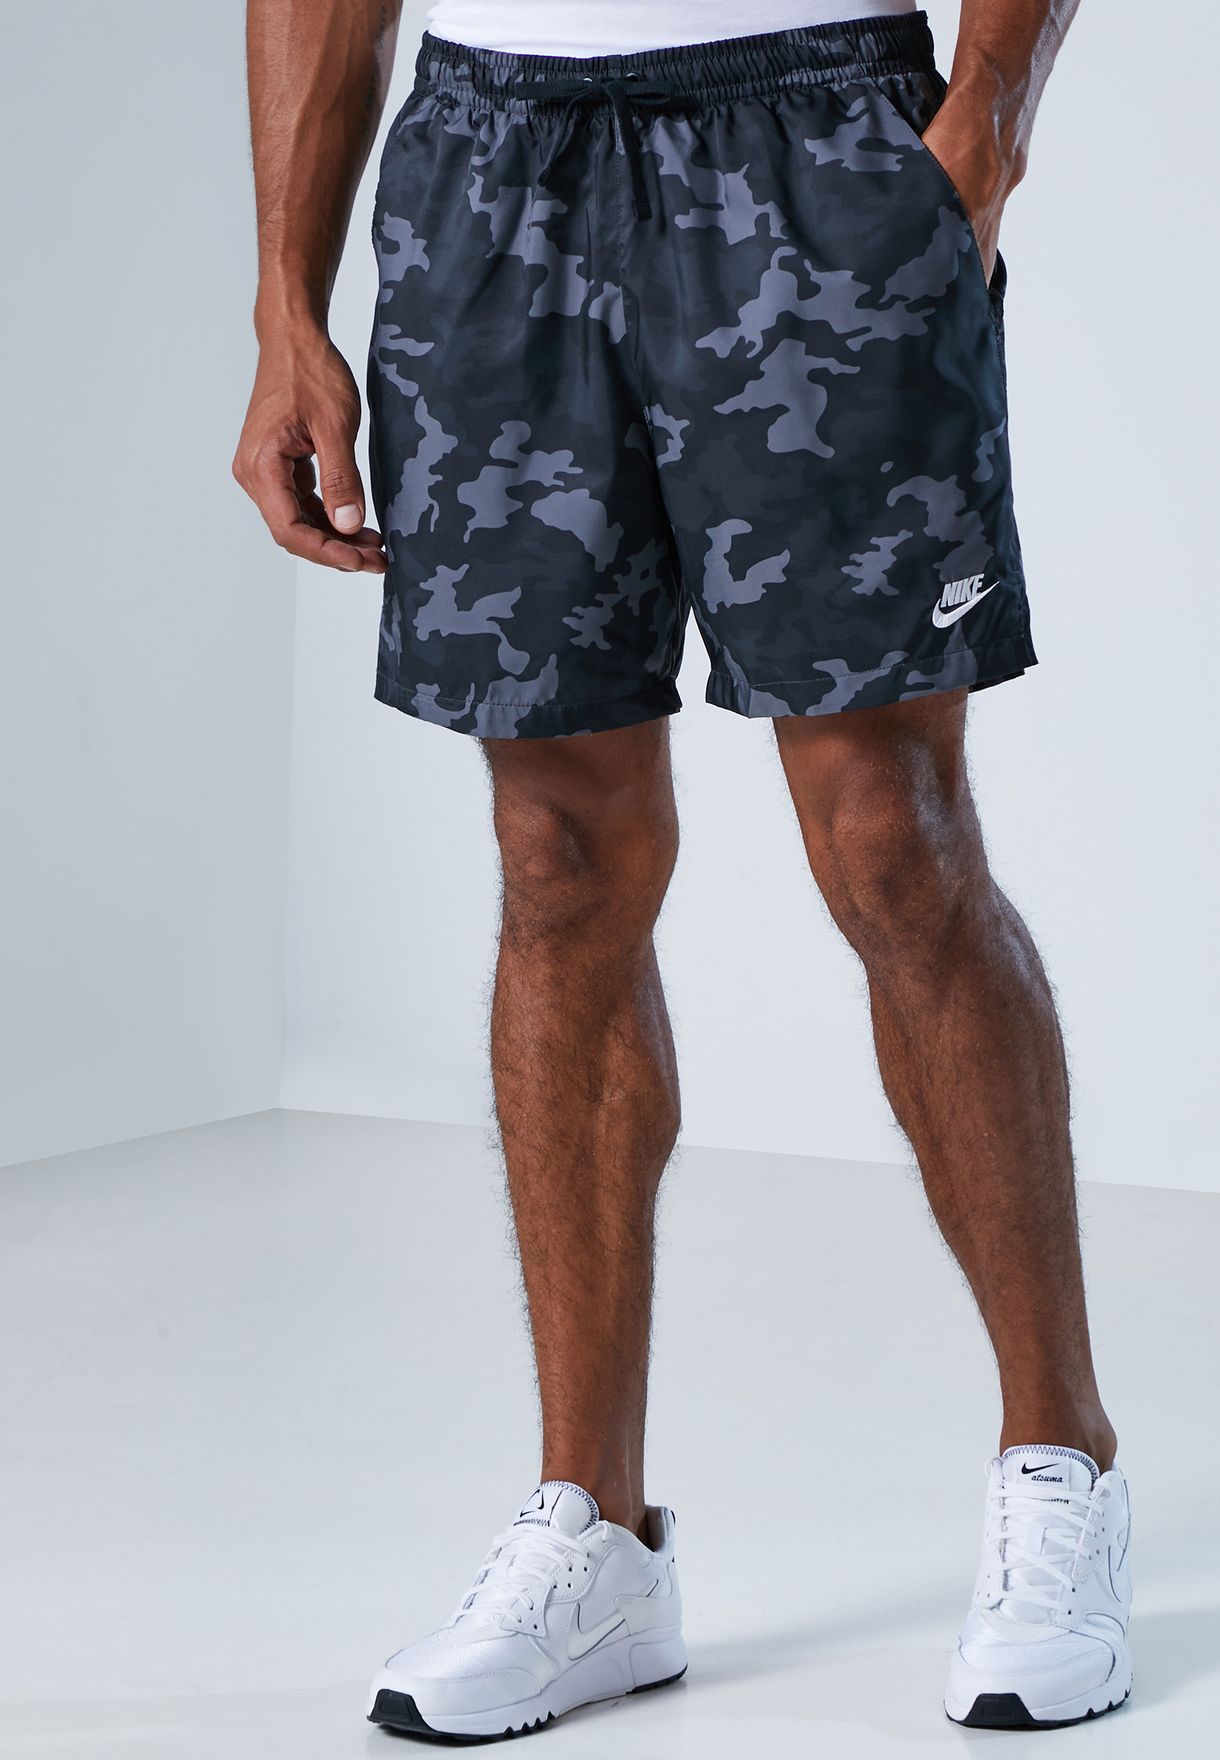 nsw woven shorts